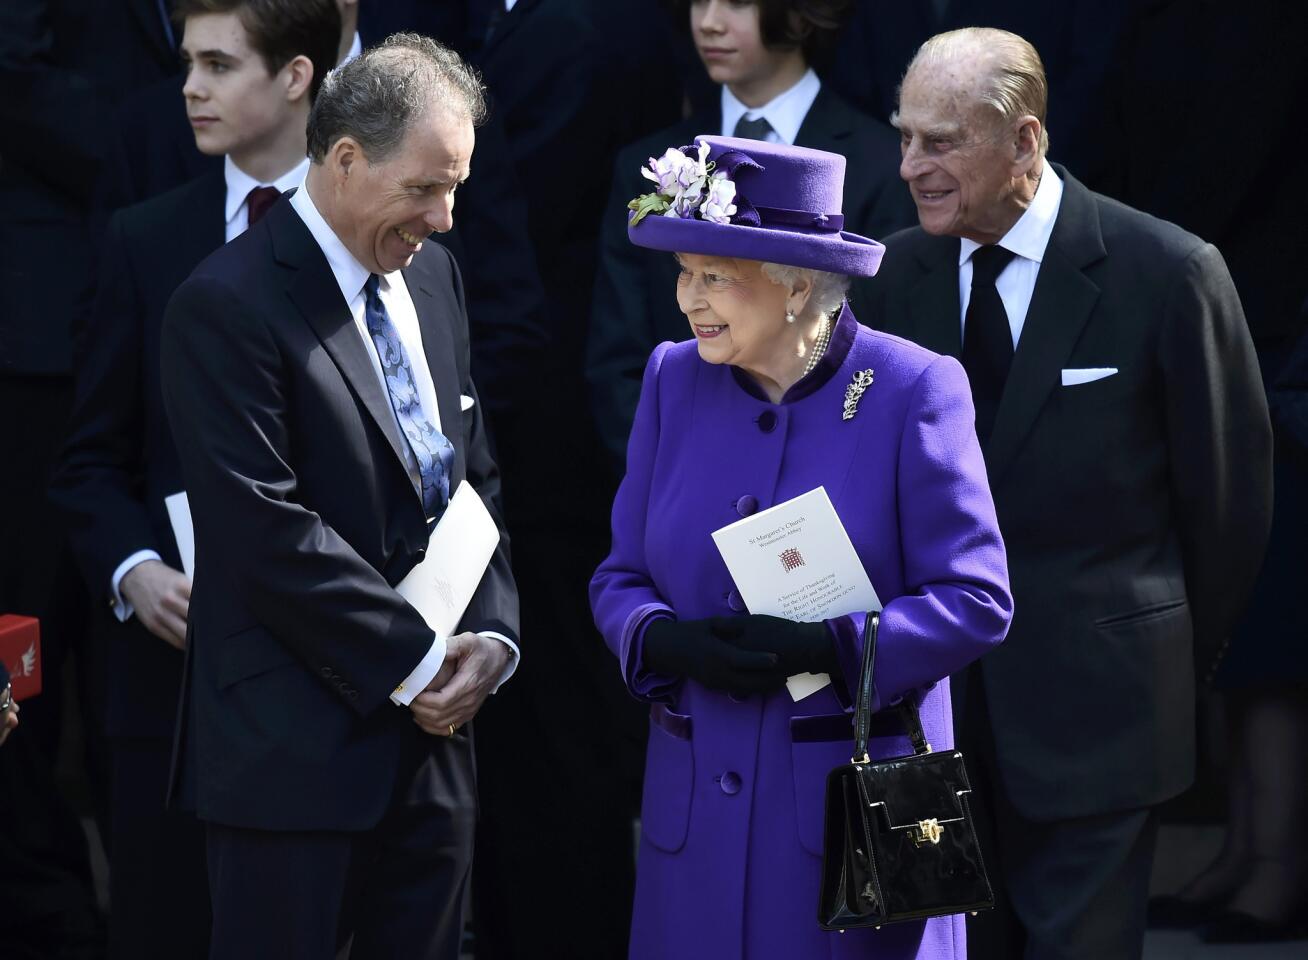 David Armstrong-Jones, 2nd Earl of Snowdon and nephew of Queen Elizabeth II, speaks to her and Prince Philip as they leave a service honoring Lord Snowdon at Westminster Abbey on April 7.